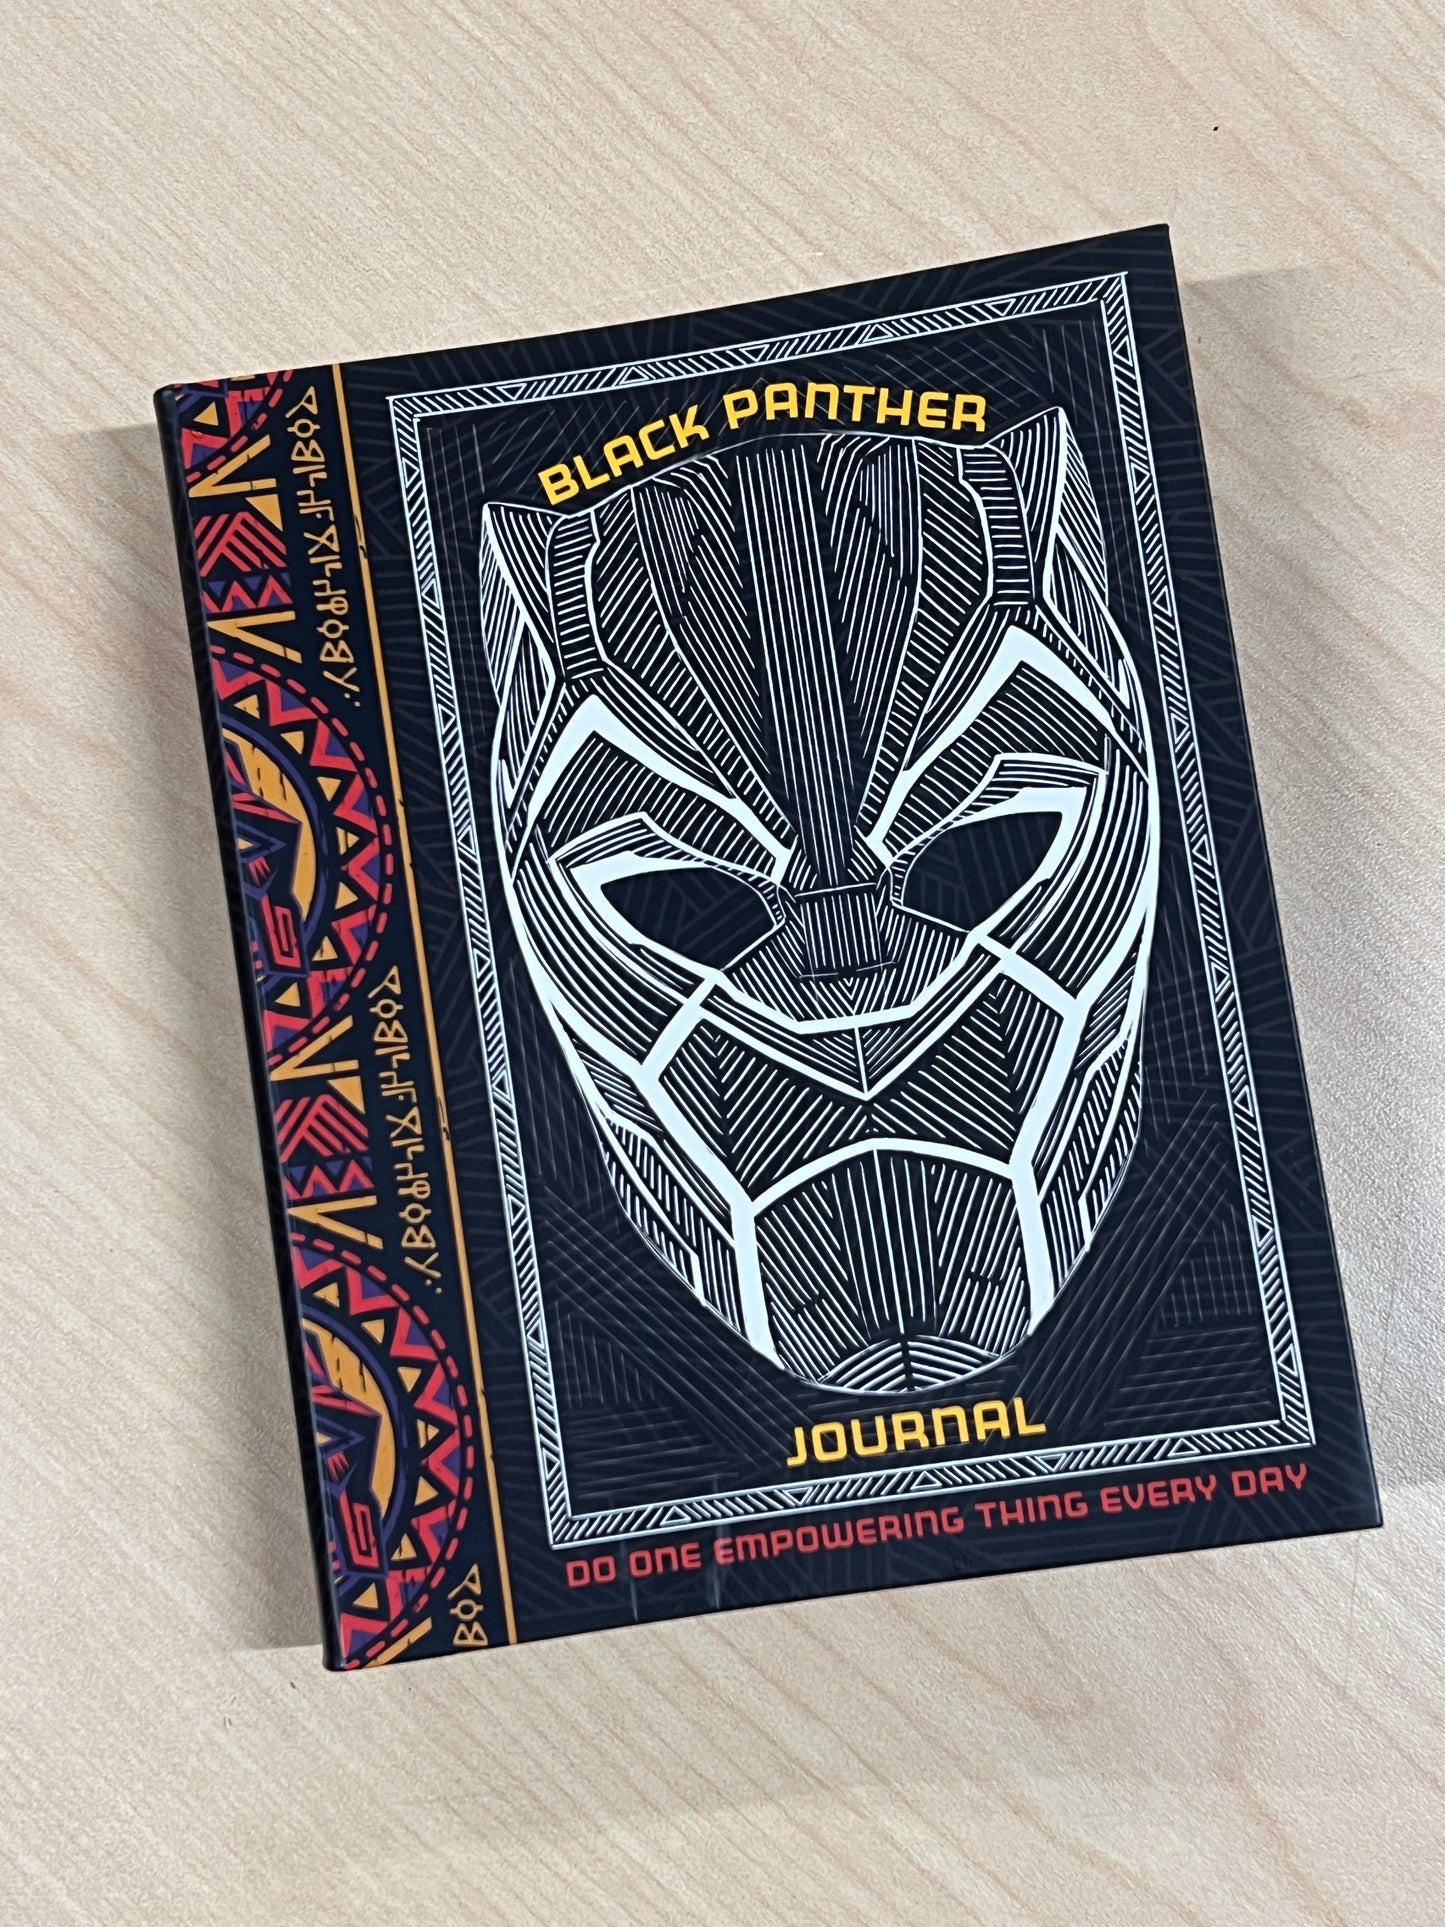 Black Panther Journal: Do One Empowering Thing Every Day